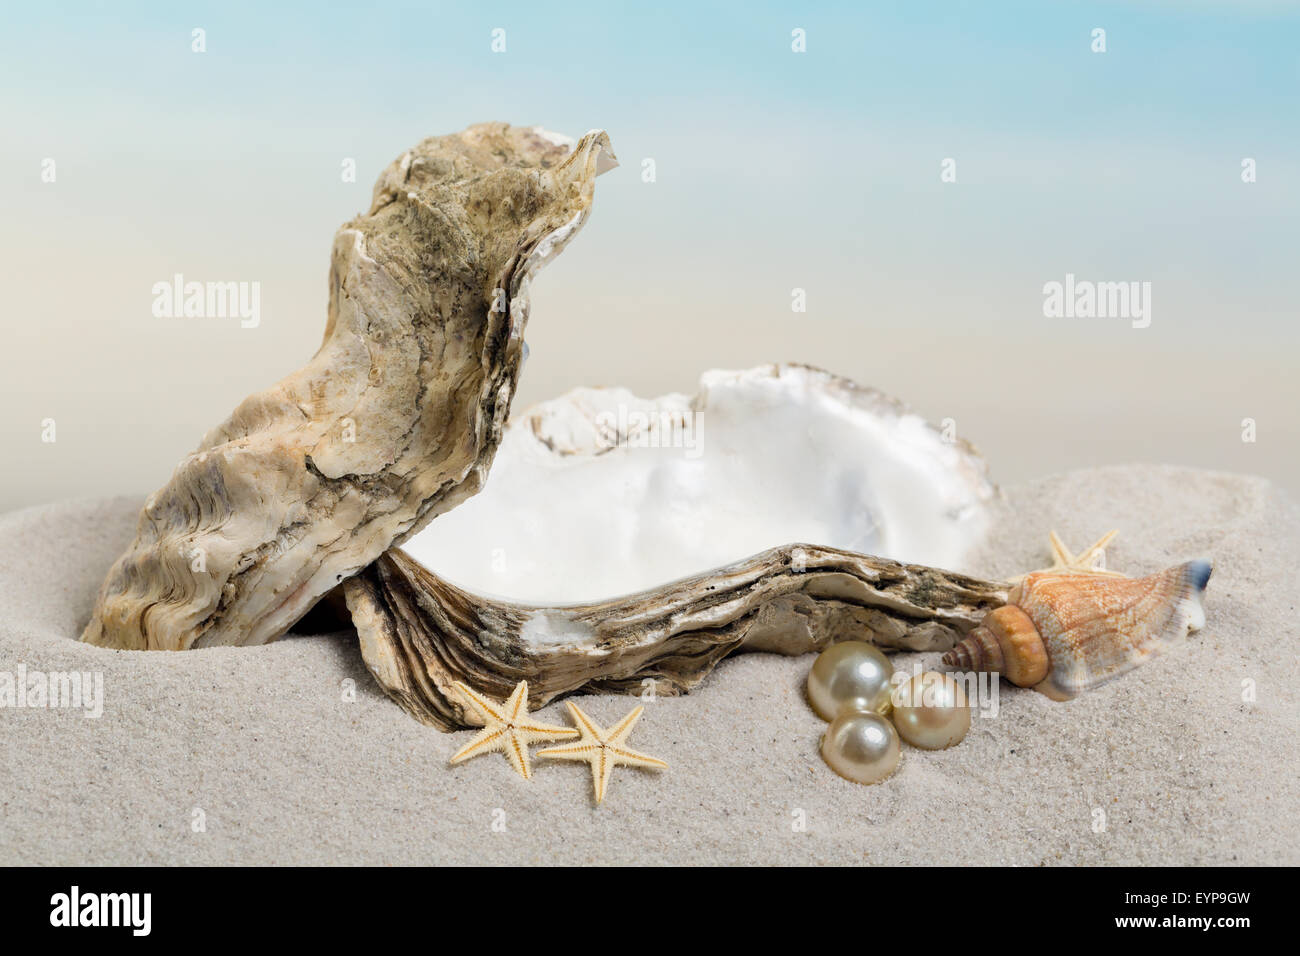 Open oyster with pearls lying on a sandy beach - excellent for photoshopping a baby or object in the oyster Stock Photo